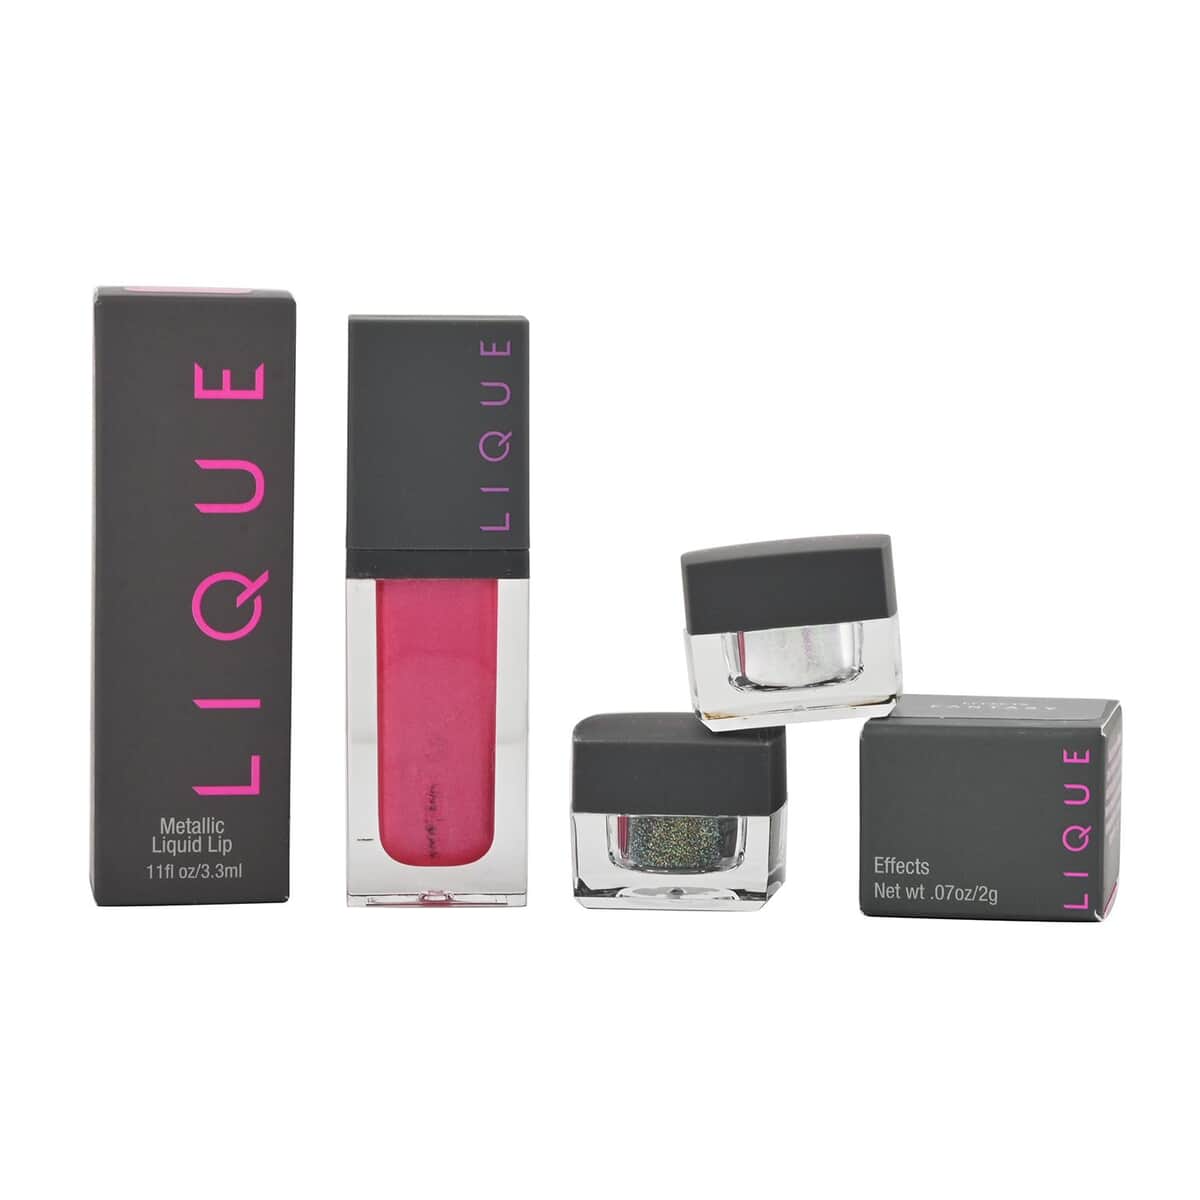 Closeout Lique Set of 1 Liquid Lip and 2 Effect Powders image number 0